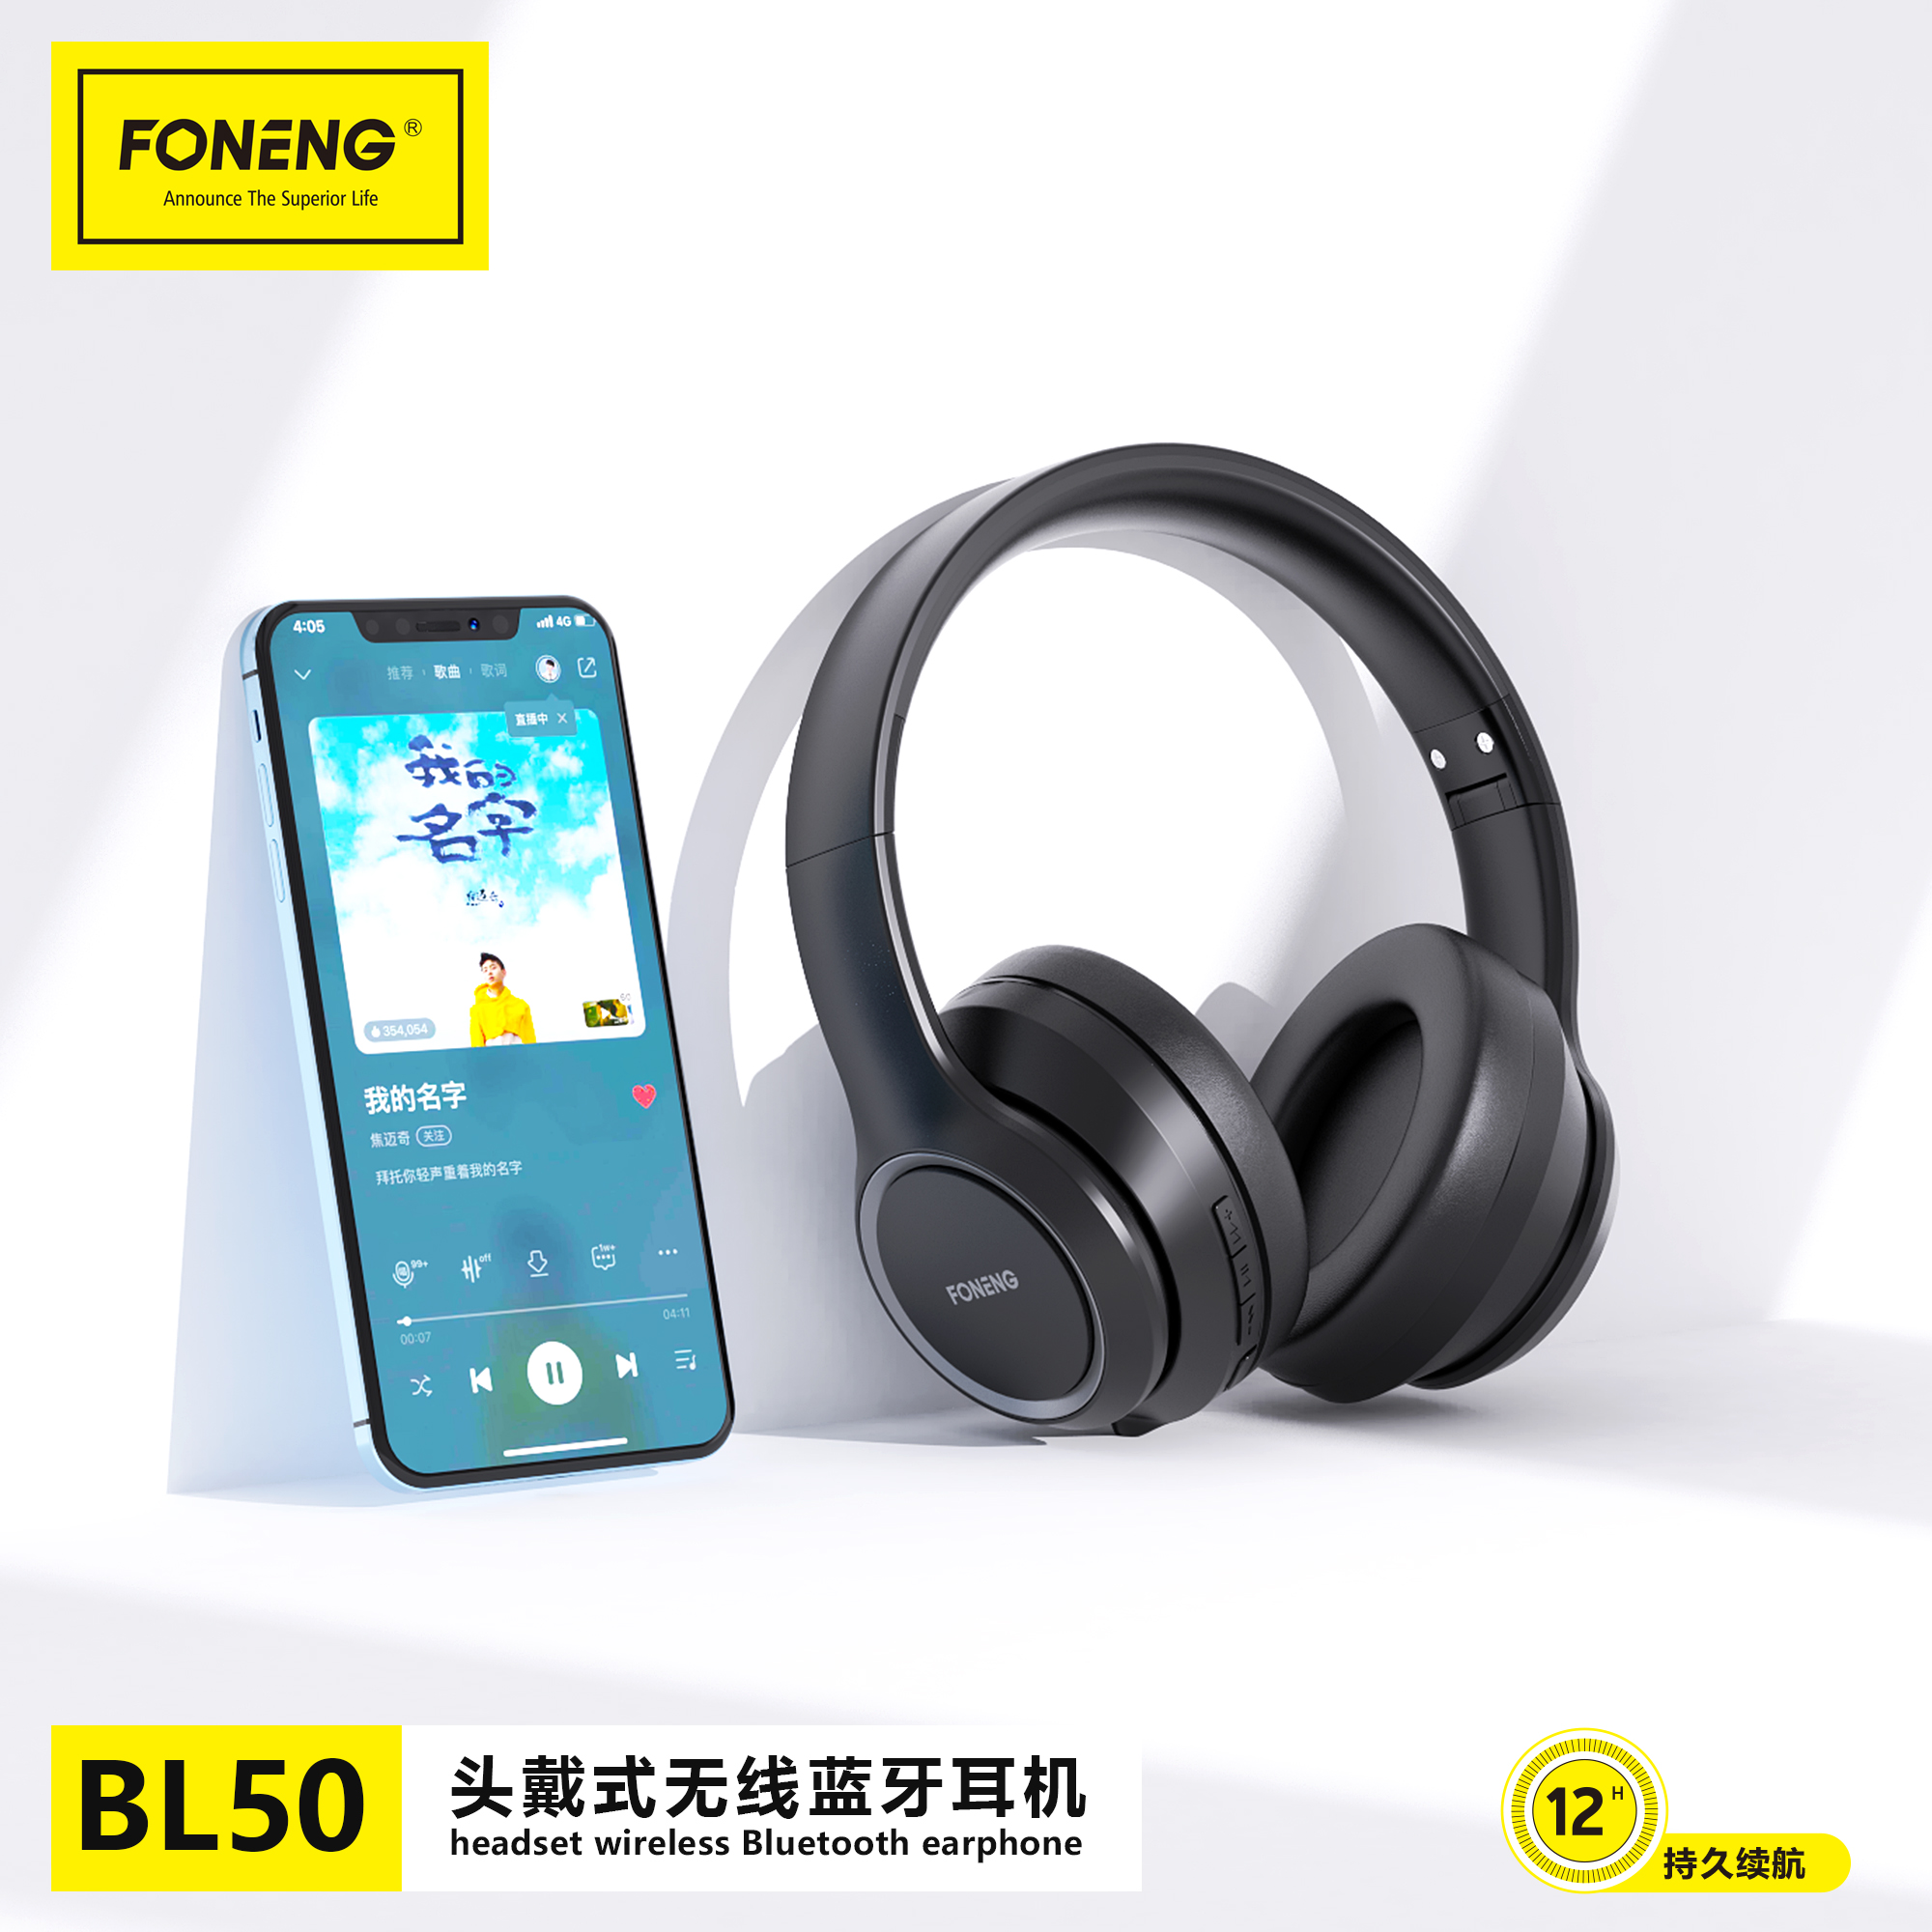 BL50 BLUETOOTH HEADSET Featured Image